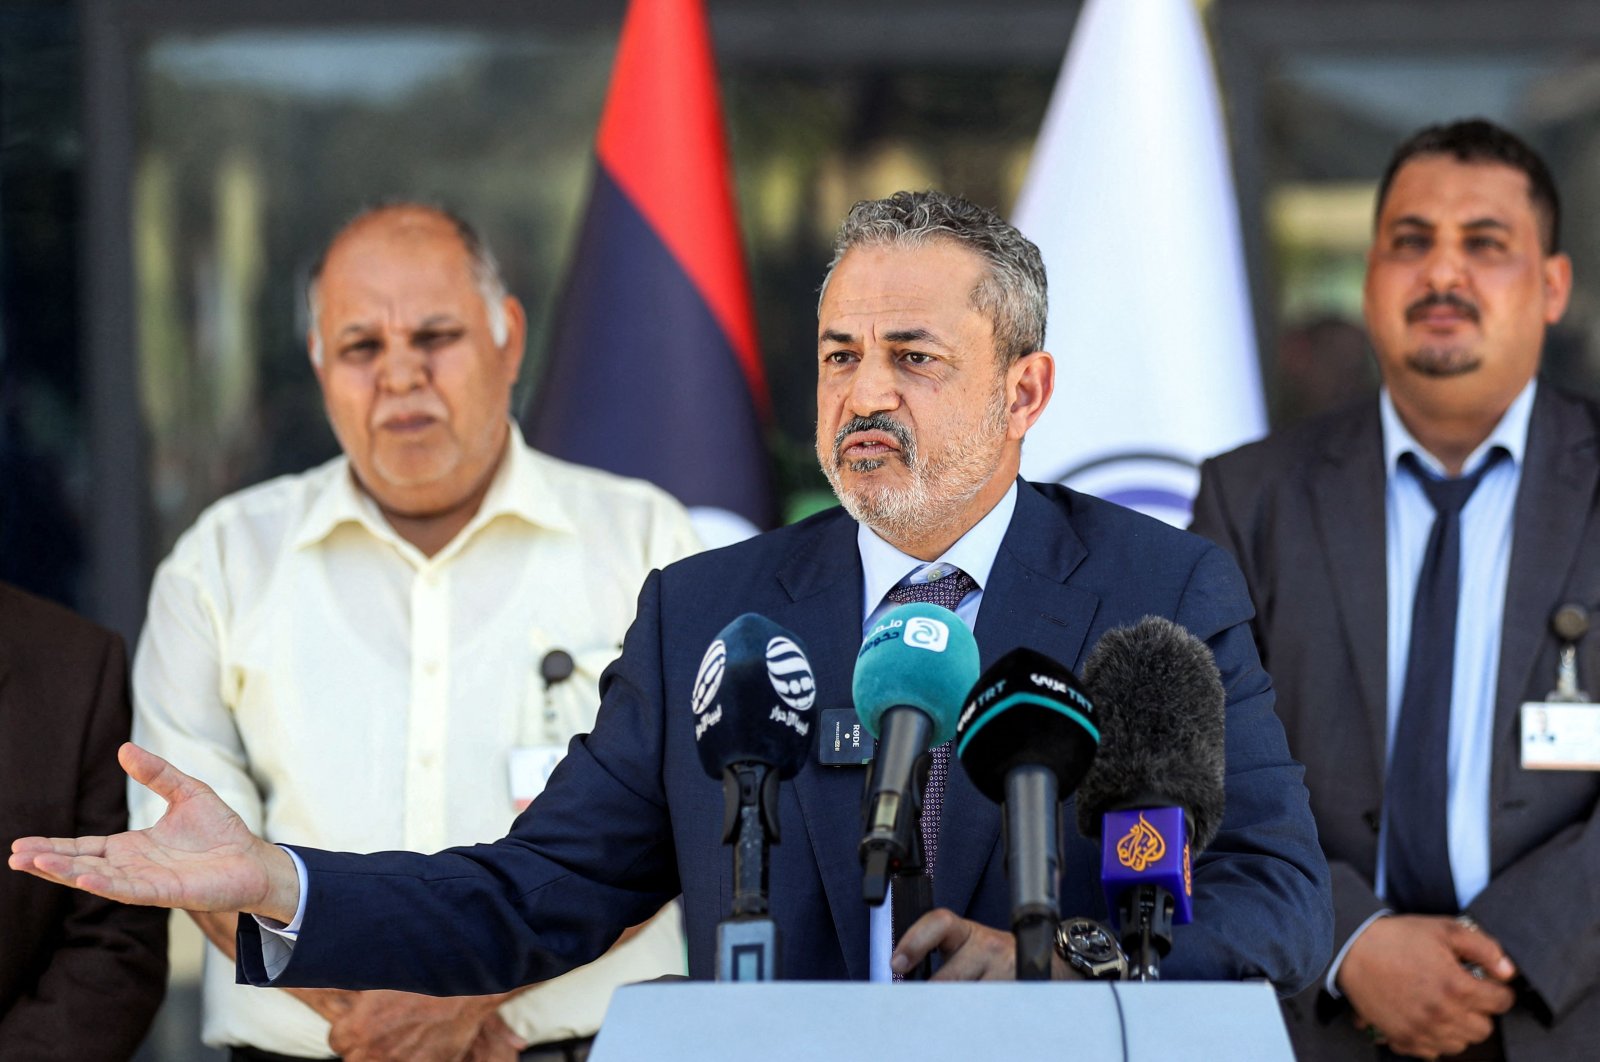 Farhat Bengdara, the new chief of Libya&#039;s National Oil Corporation who was appointed by the Tripoli-based Prime Minister Abdul Hamid Mohammed Dbeibah, gives a press conference outside the corporation&#039;s headquarters in the capital Tripoli, Libya, July 14, 2022. (AFP Photo)